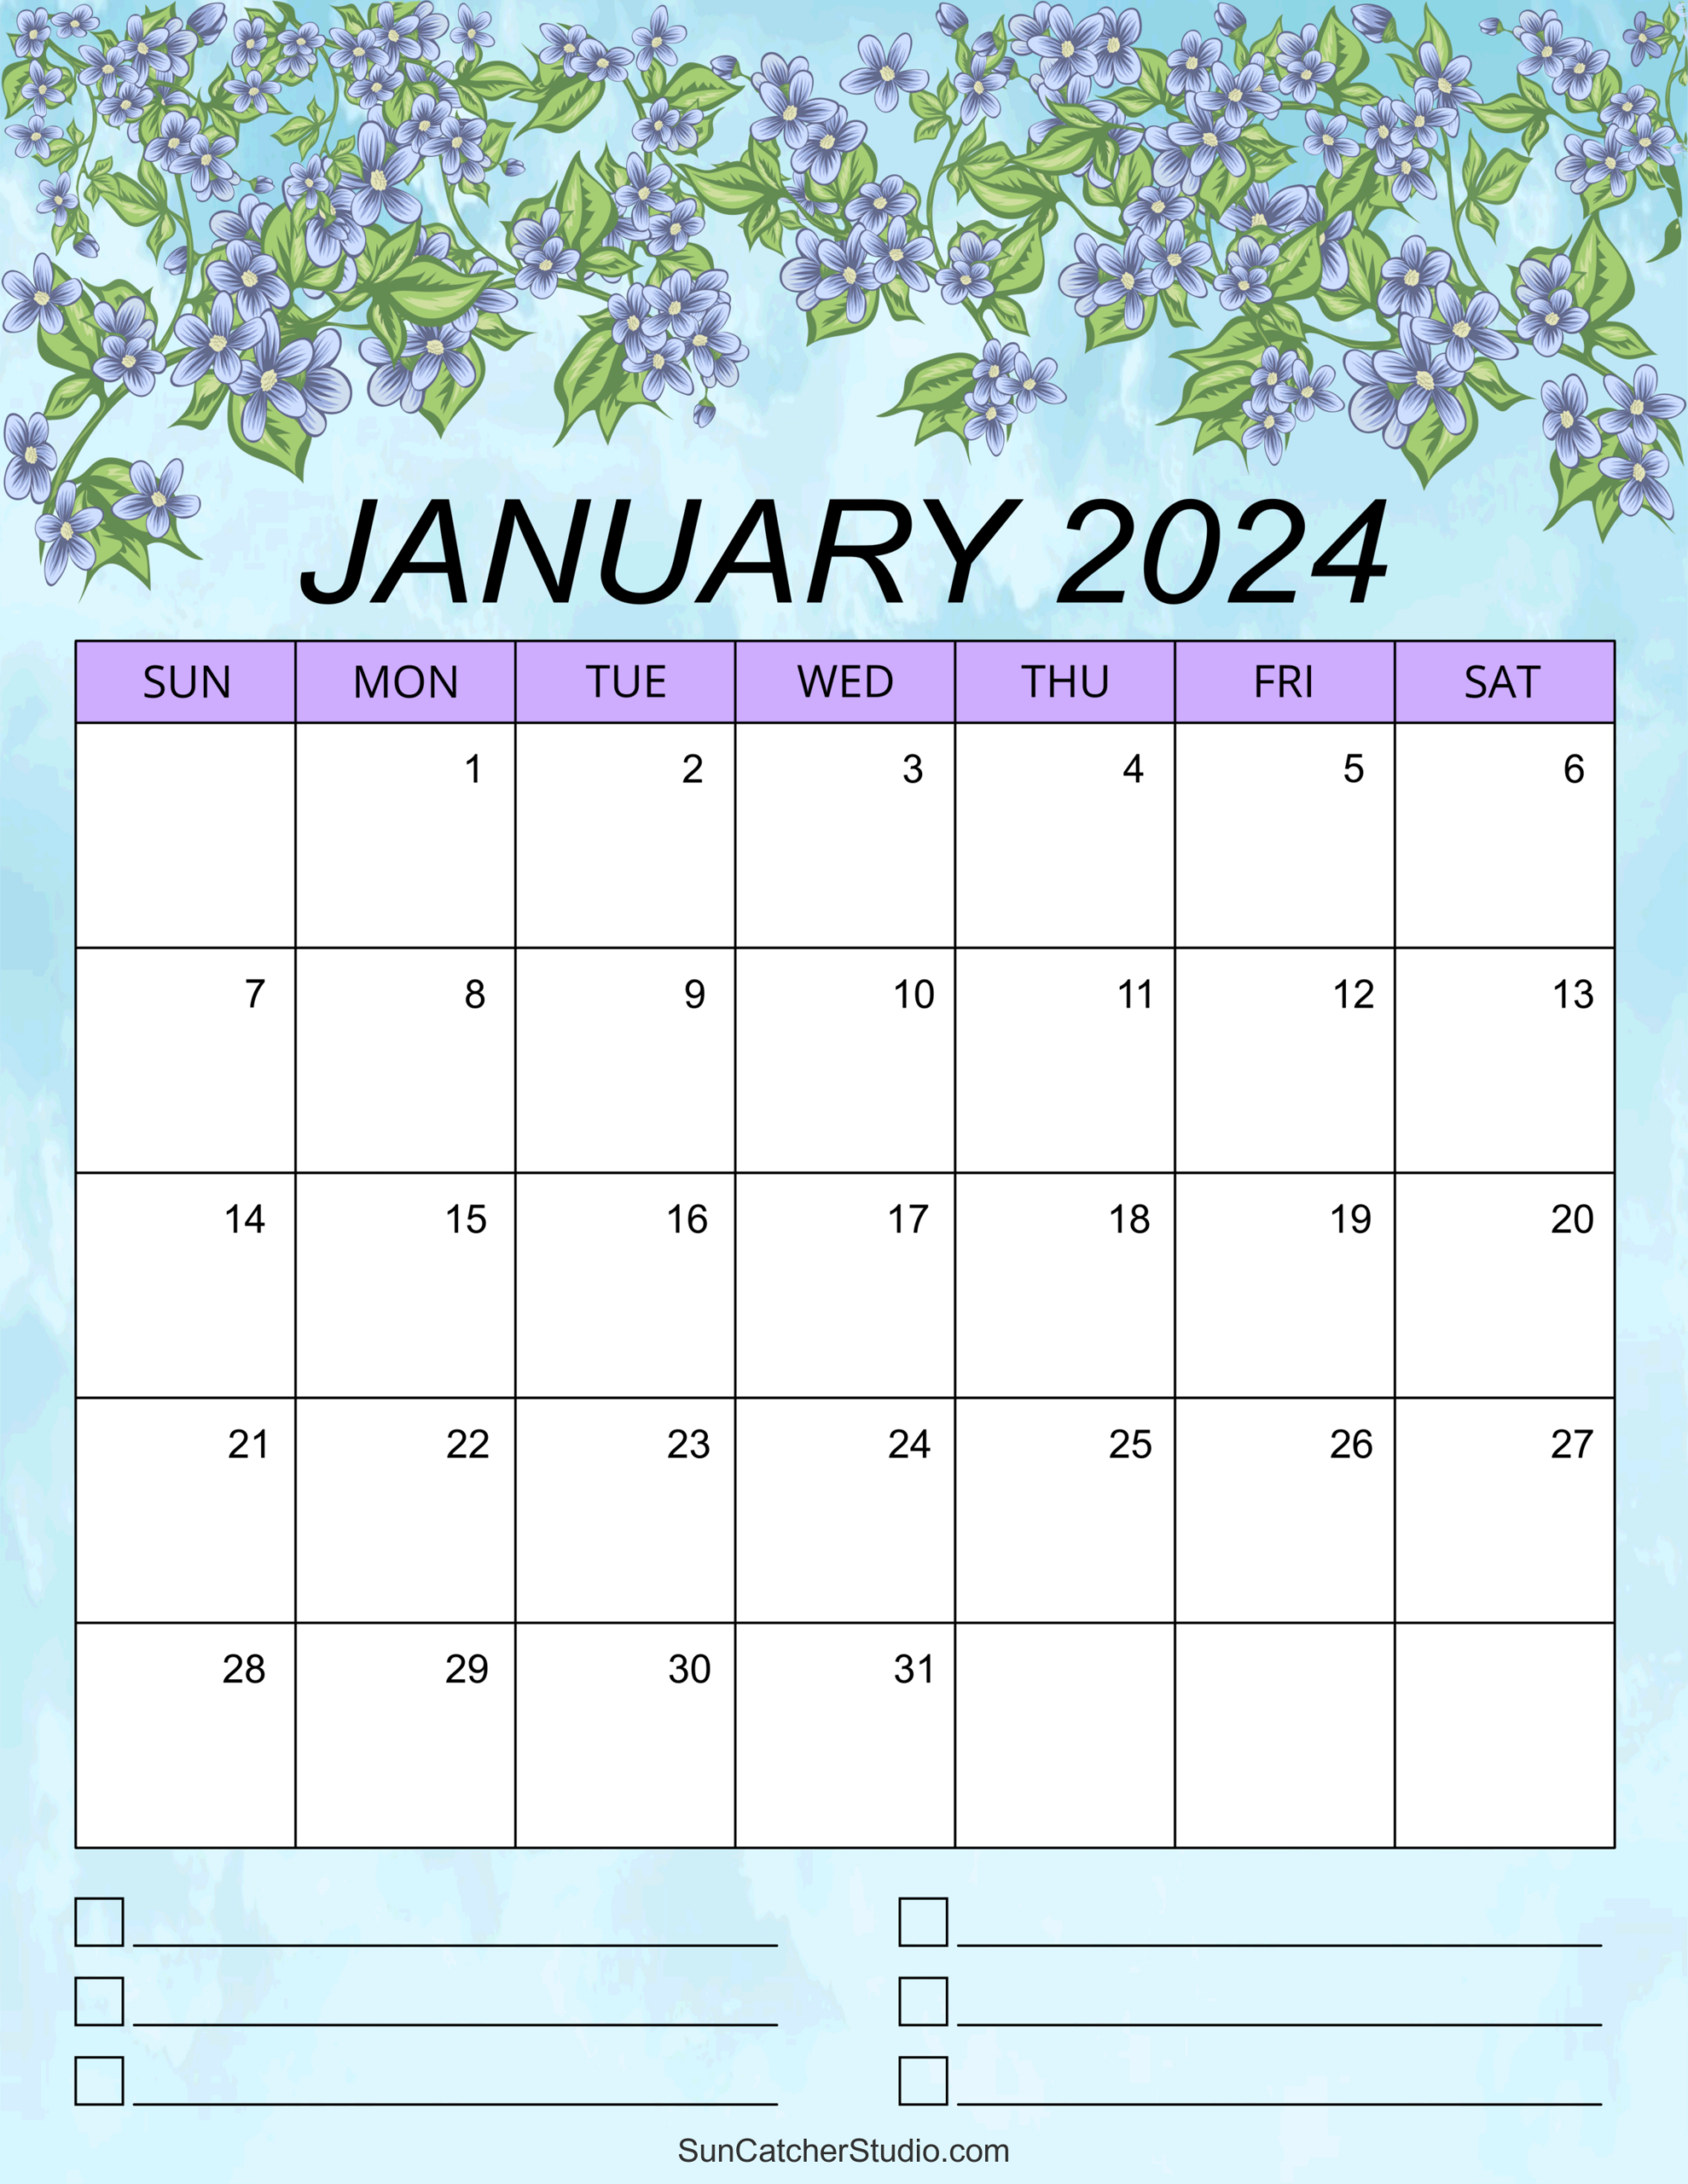 January 2024 Calendar (Free Printable) – Diy Projects, Patterns | Printable Calendar 2024 Monthly Portrait